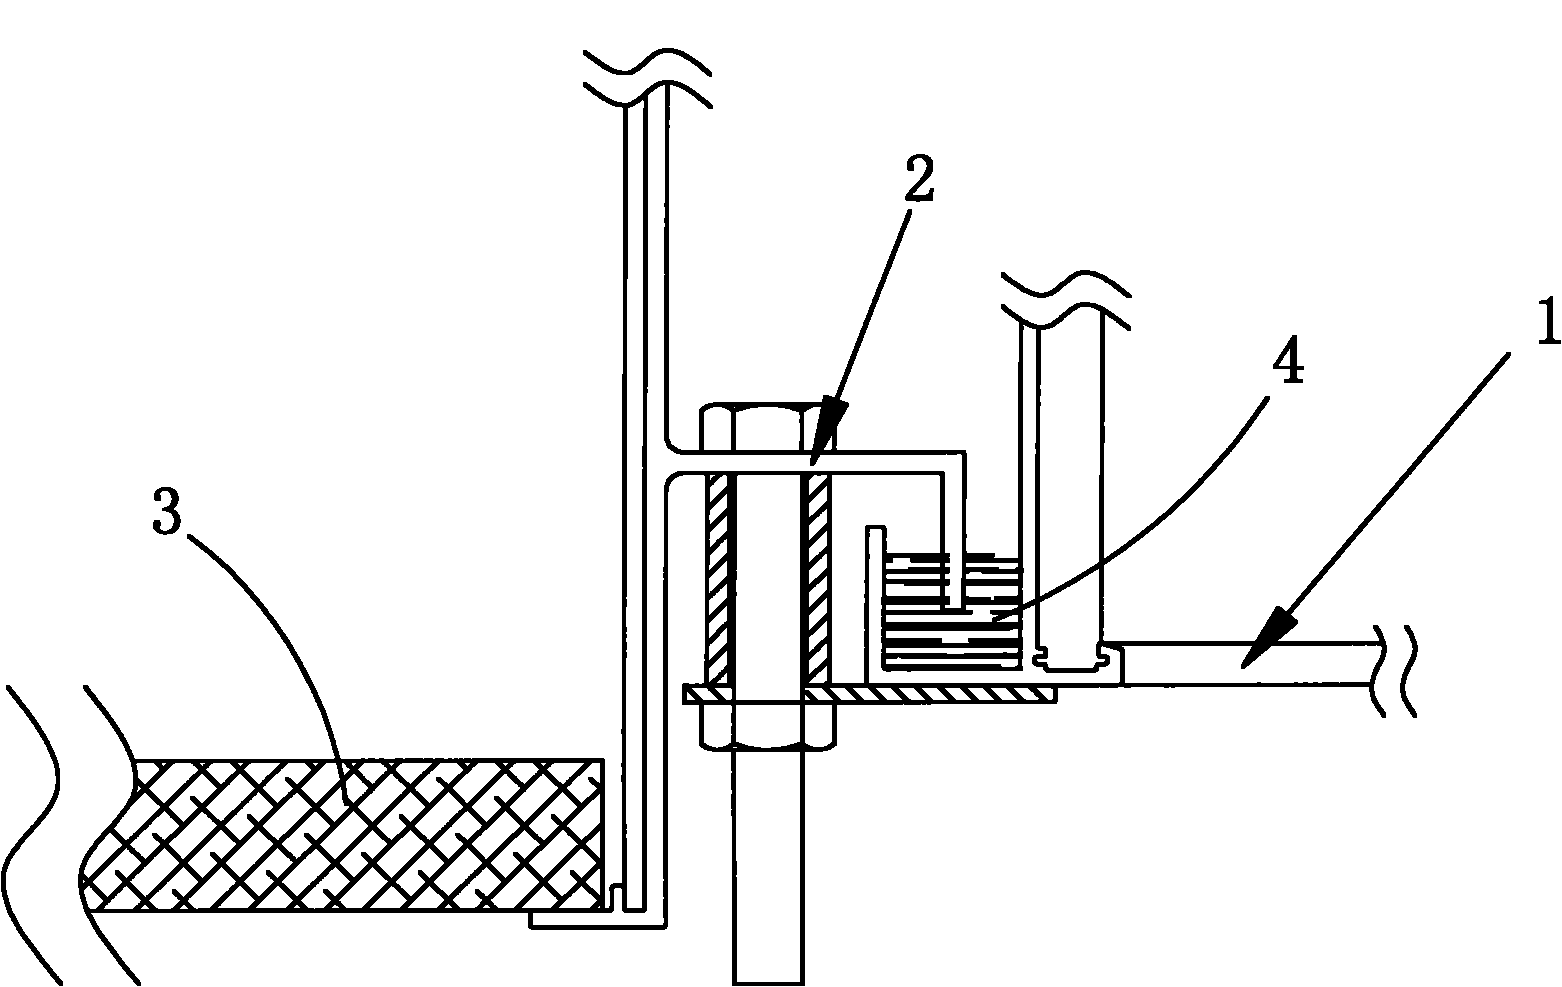 Box structure for filter